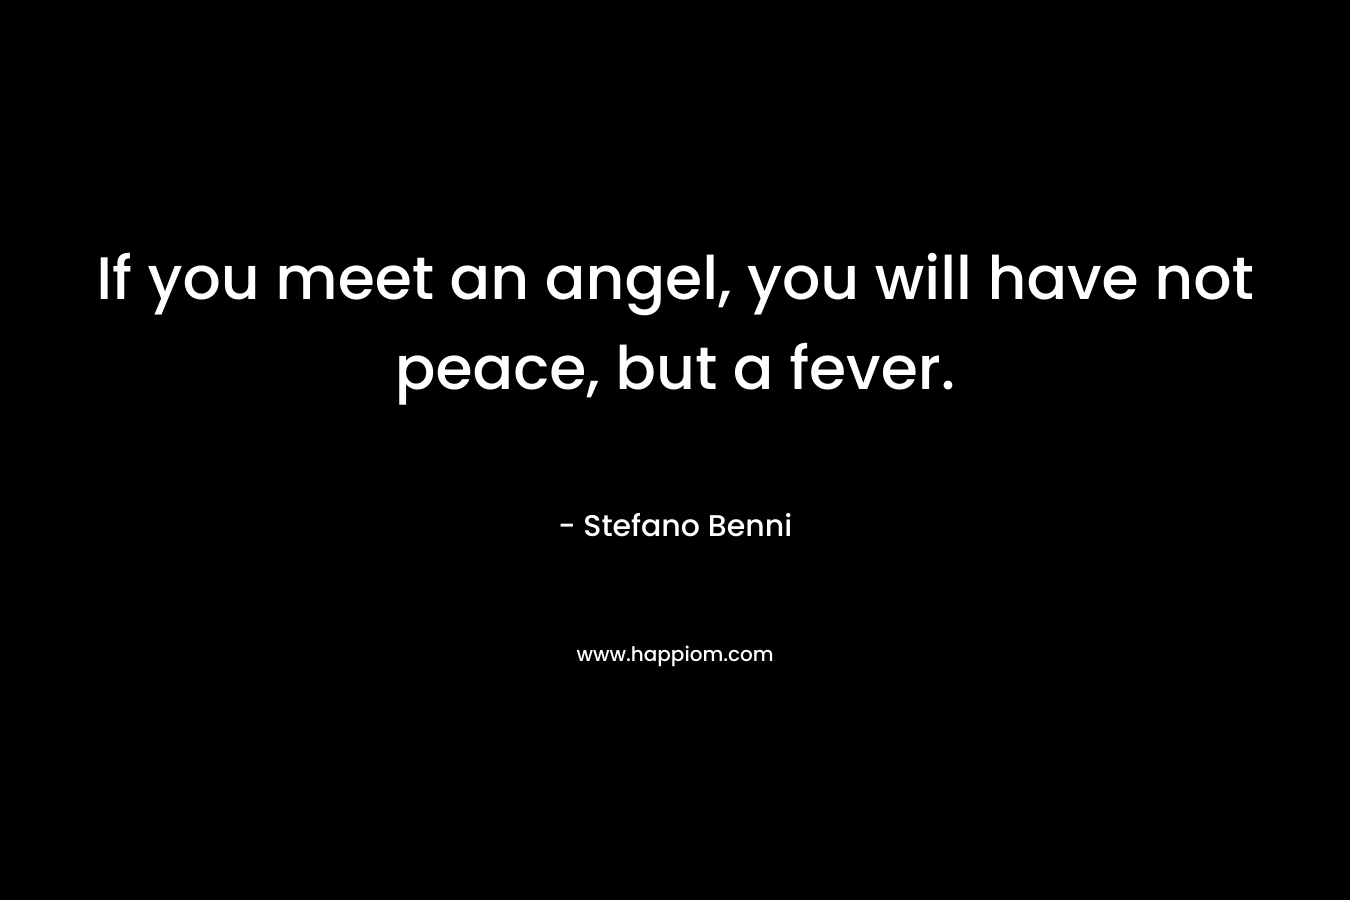 If you meet an angel, you will have not peace, but a fever.